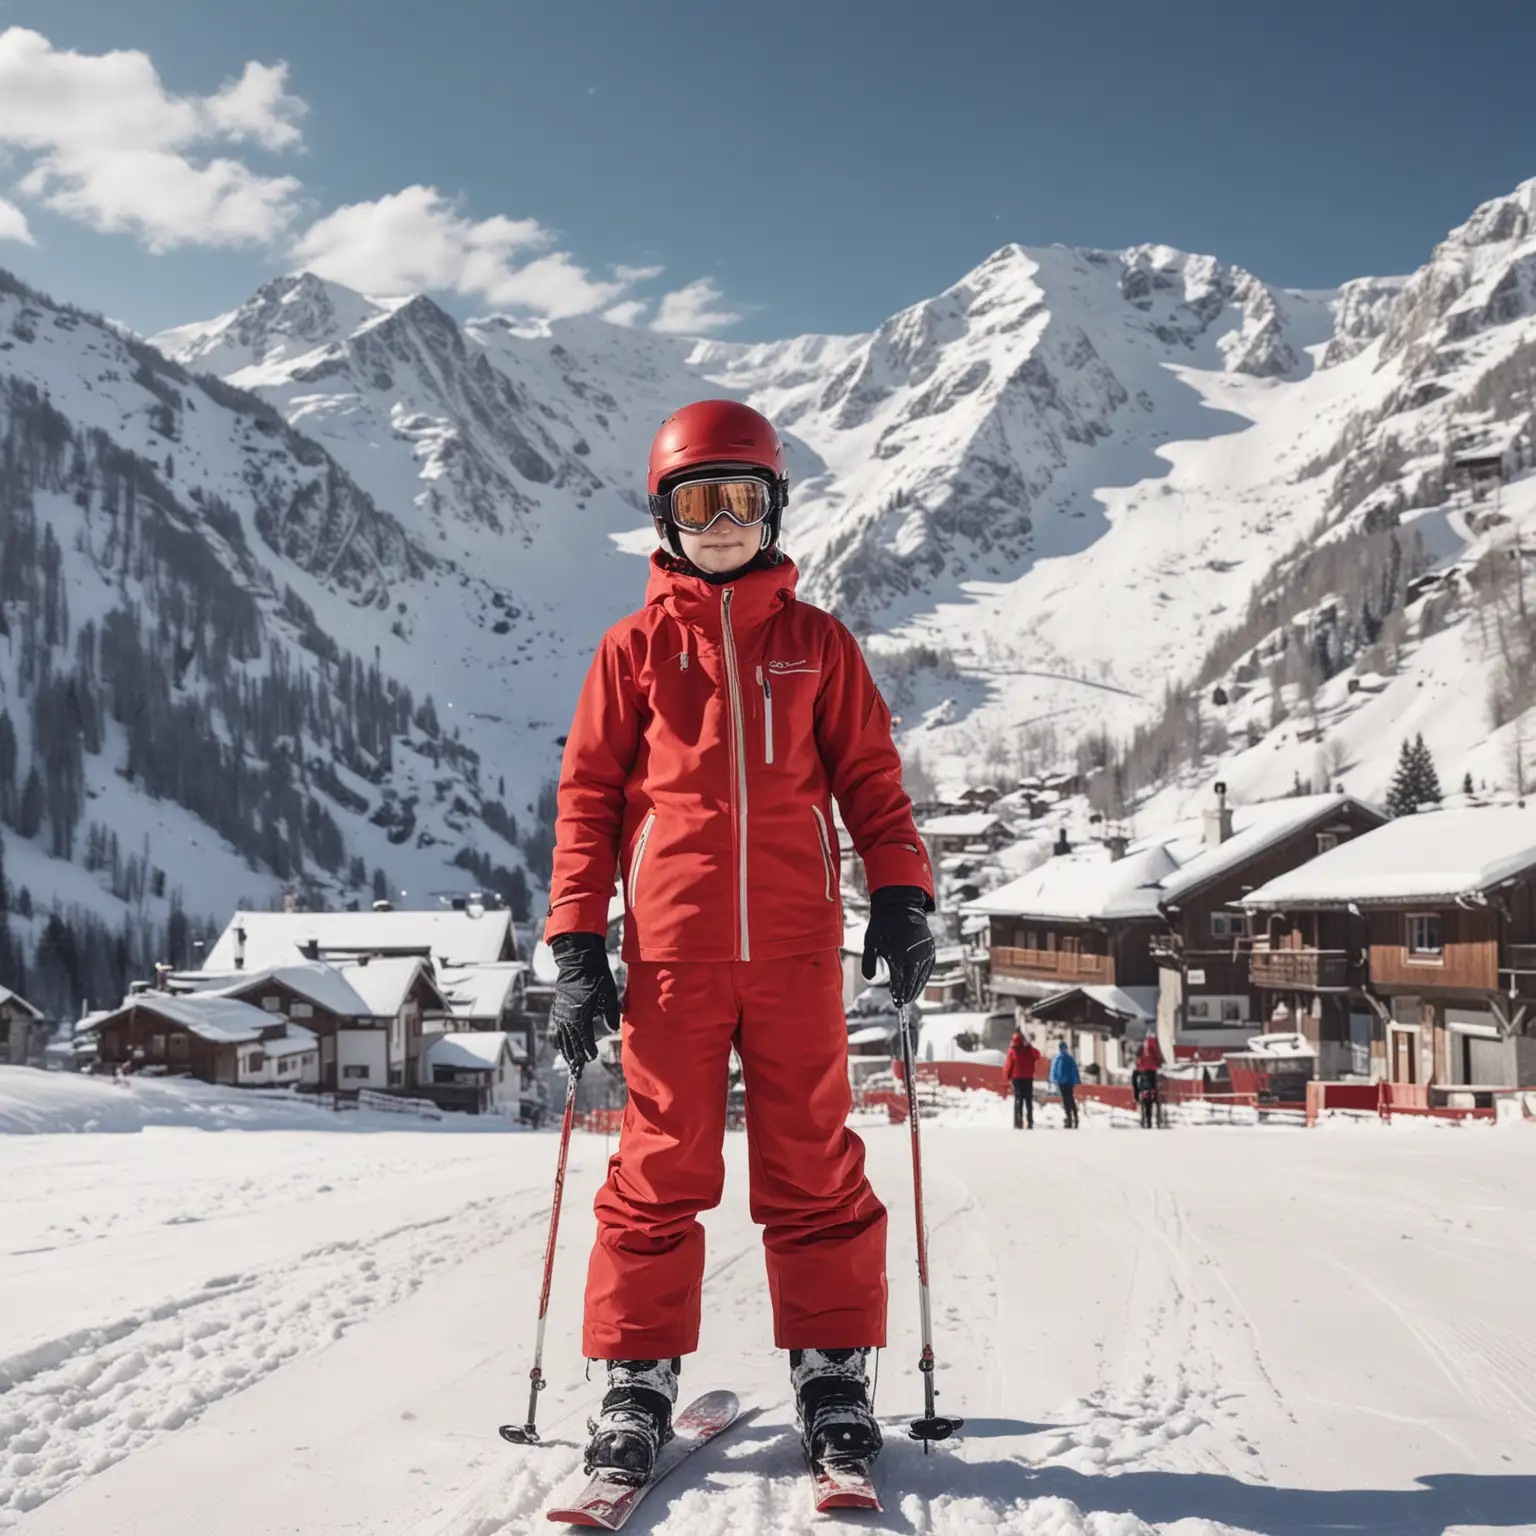 Boy-Skiing-in-Red-Suit-with-White-Helmet-on-Snowy-Mountain